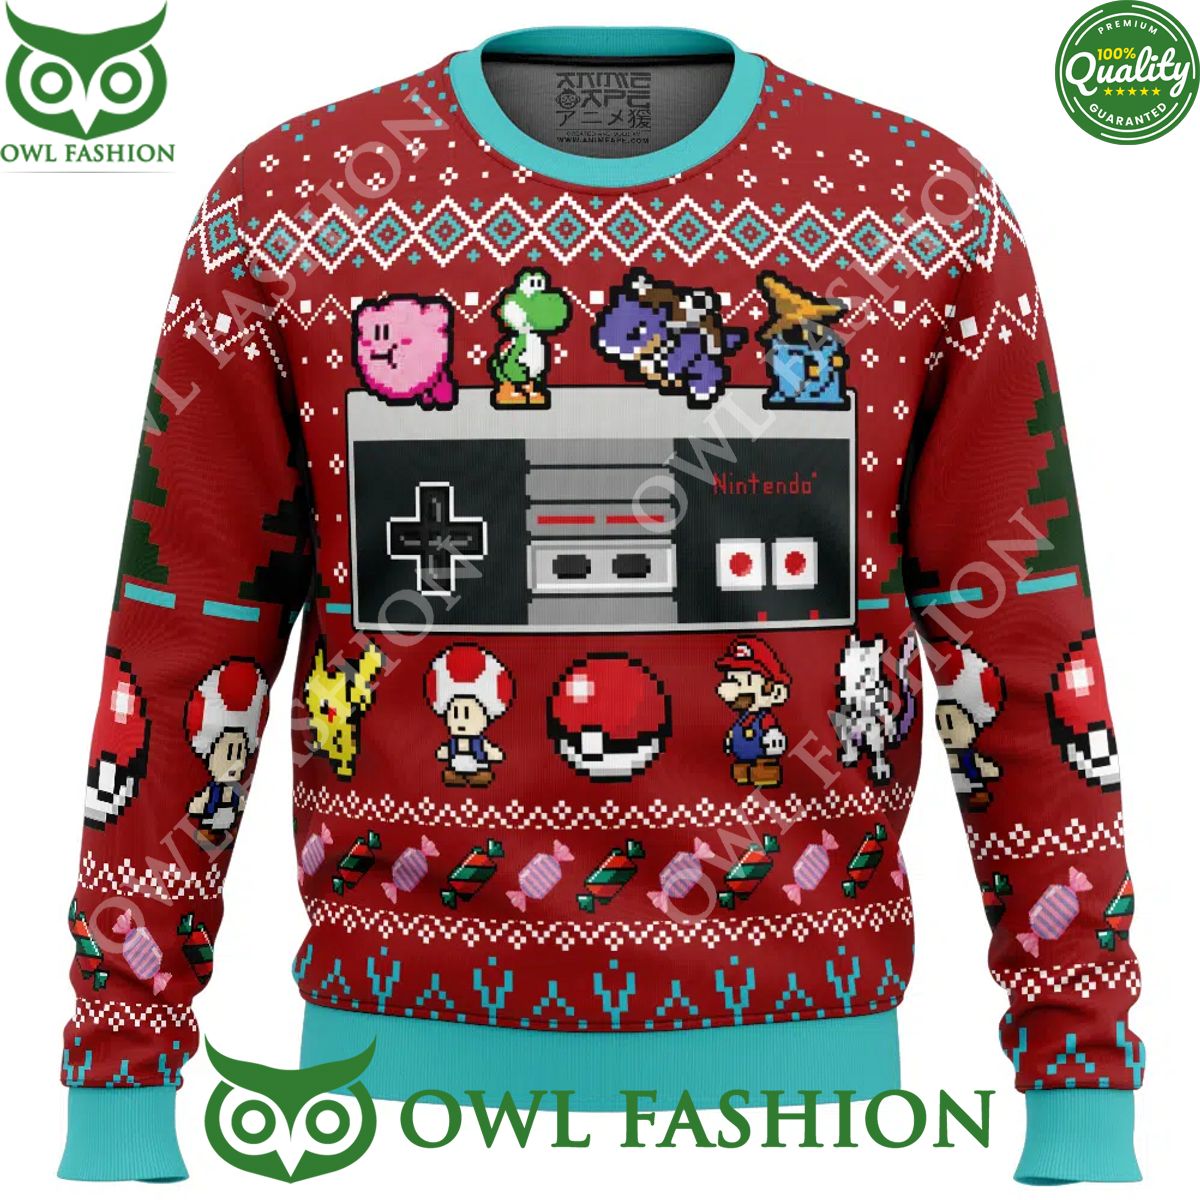 Nintendo Controller Game Ugly Christmas Sweater Jumper Natural and awesome